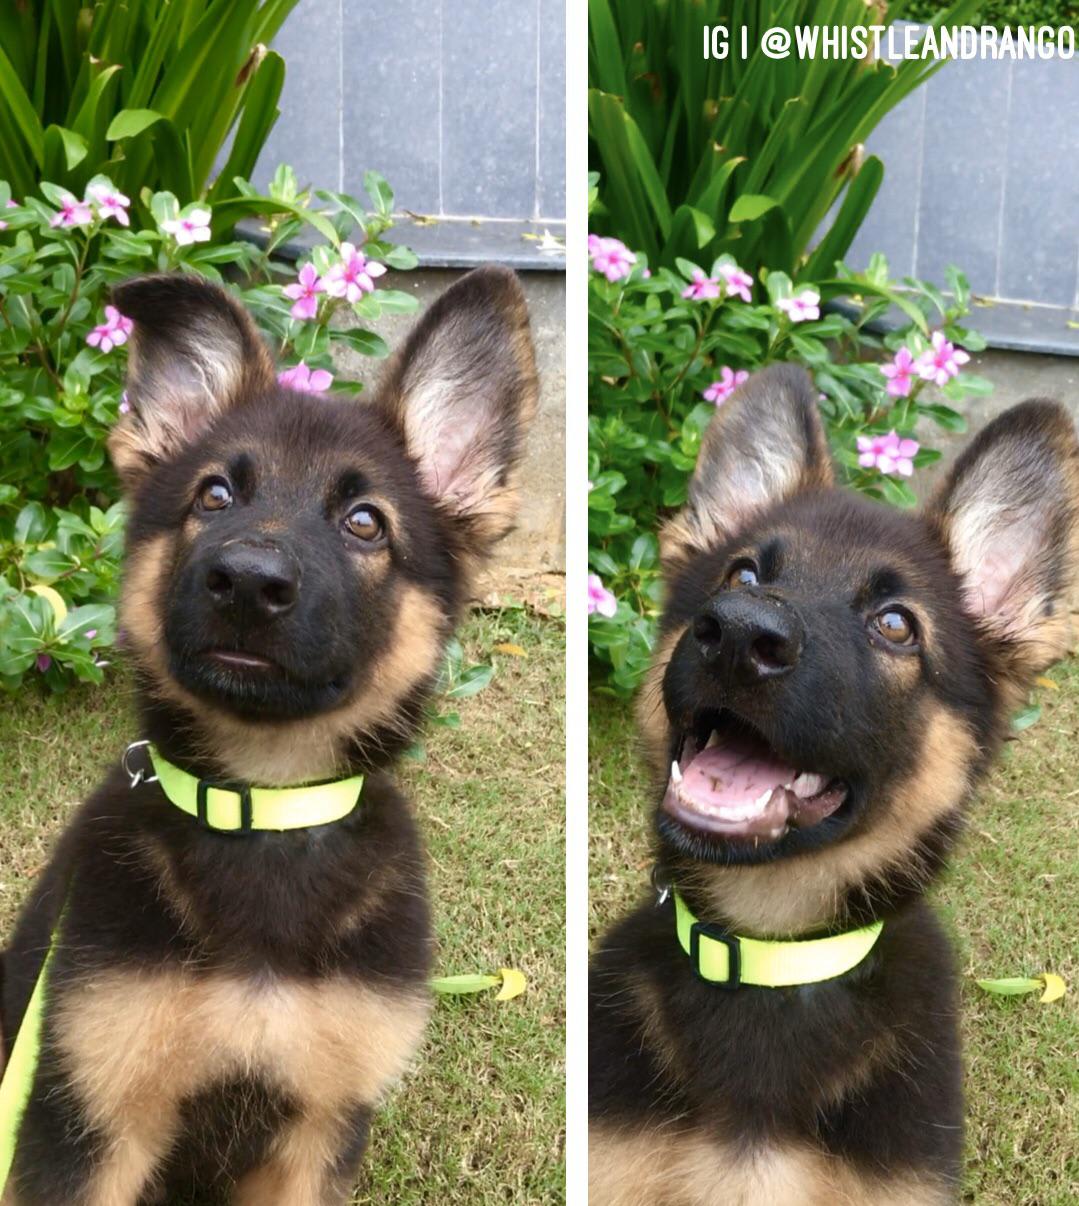 Before and after I told Rango that he’s a good boy. 🥰